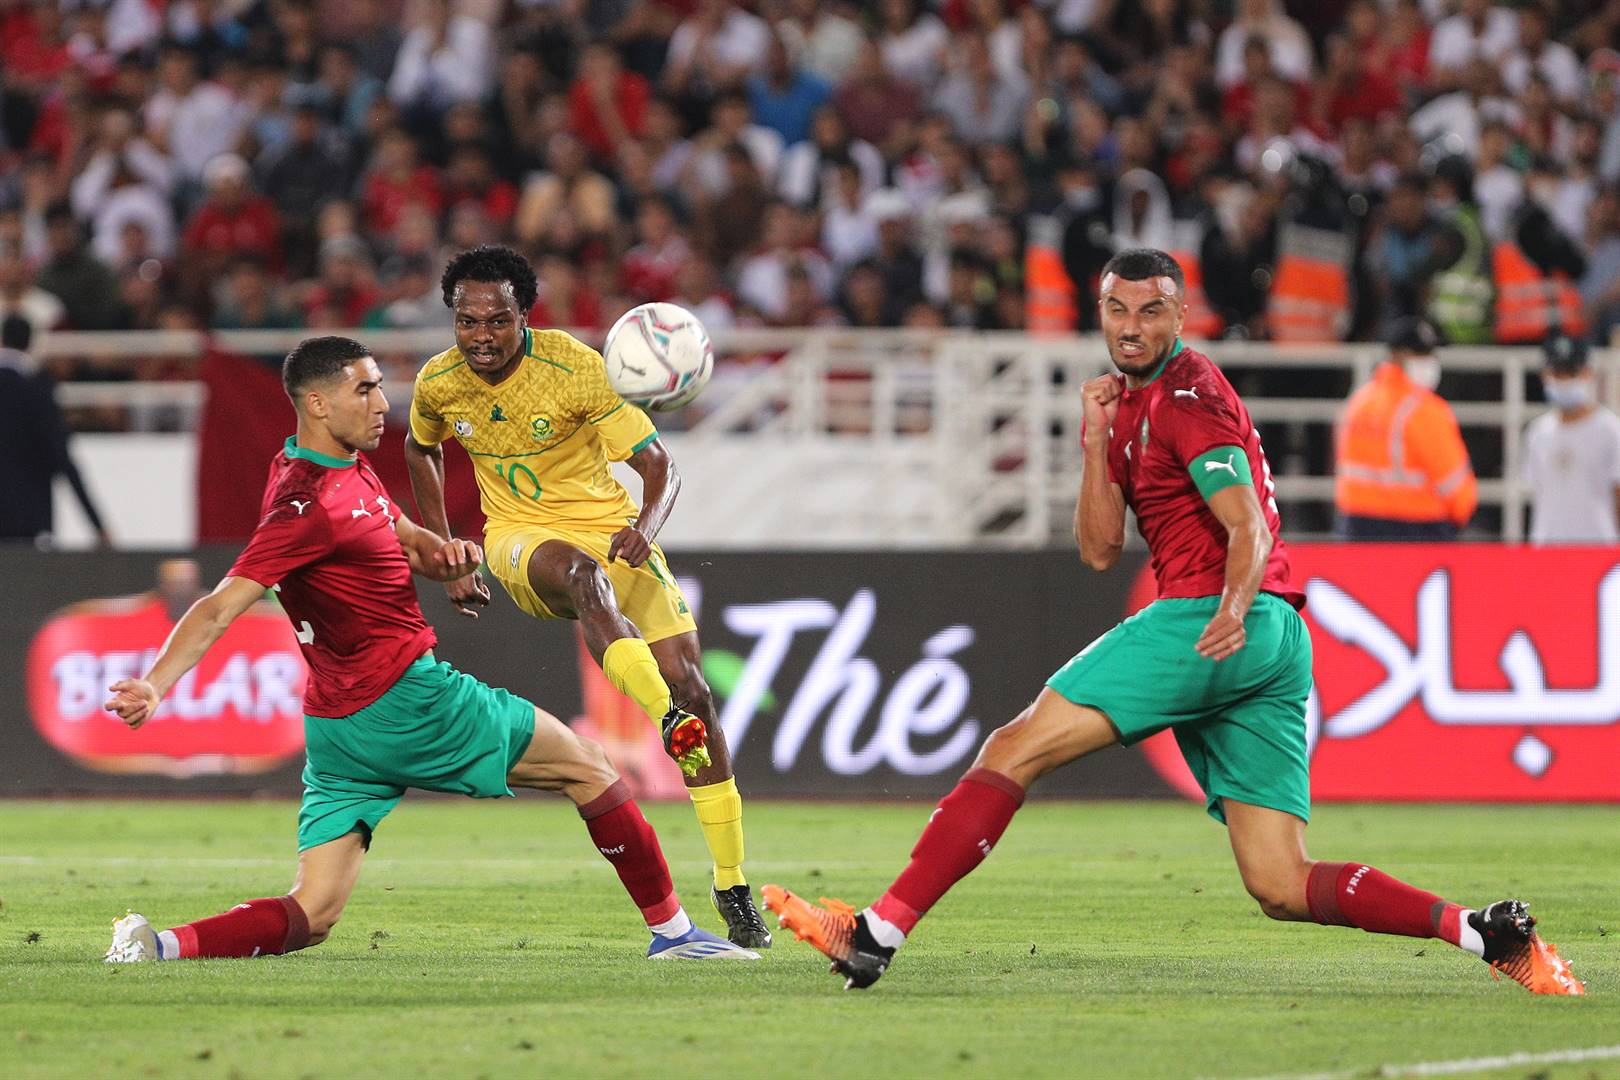 Percy Tau squeezes a shot at goal under the attention of Morocco defenders during the two nations’ Afcon qualifier at the Stade Prince Moulay Abdallah in Rabat on Thursday. Photo: Nour Akanja/BackpagePix 